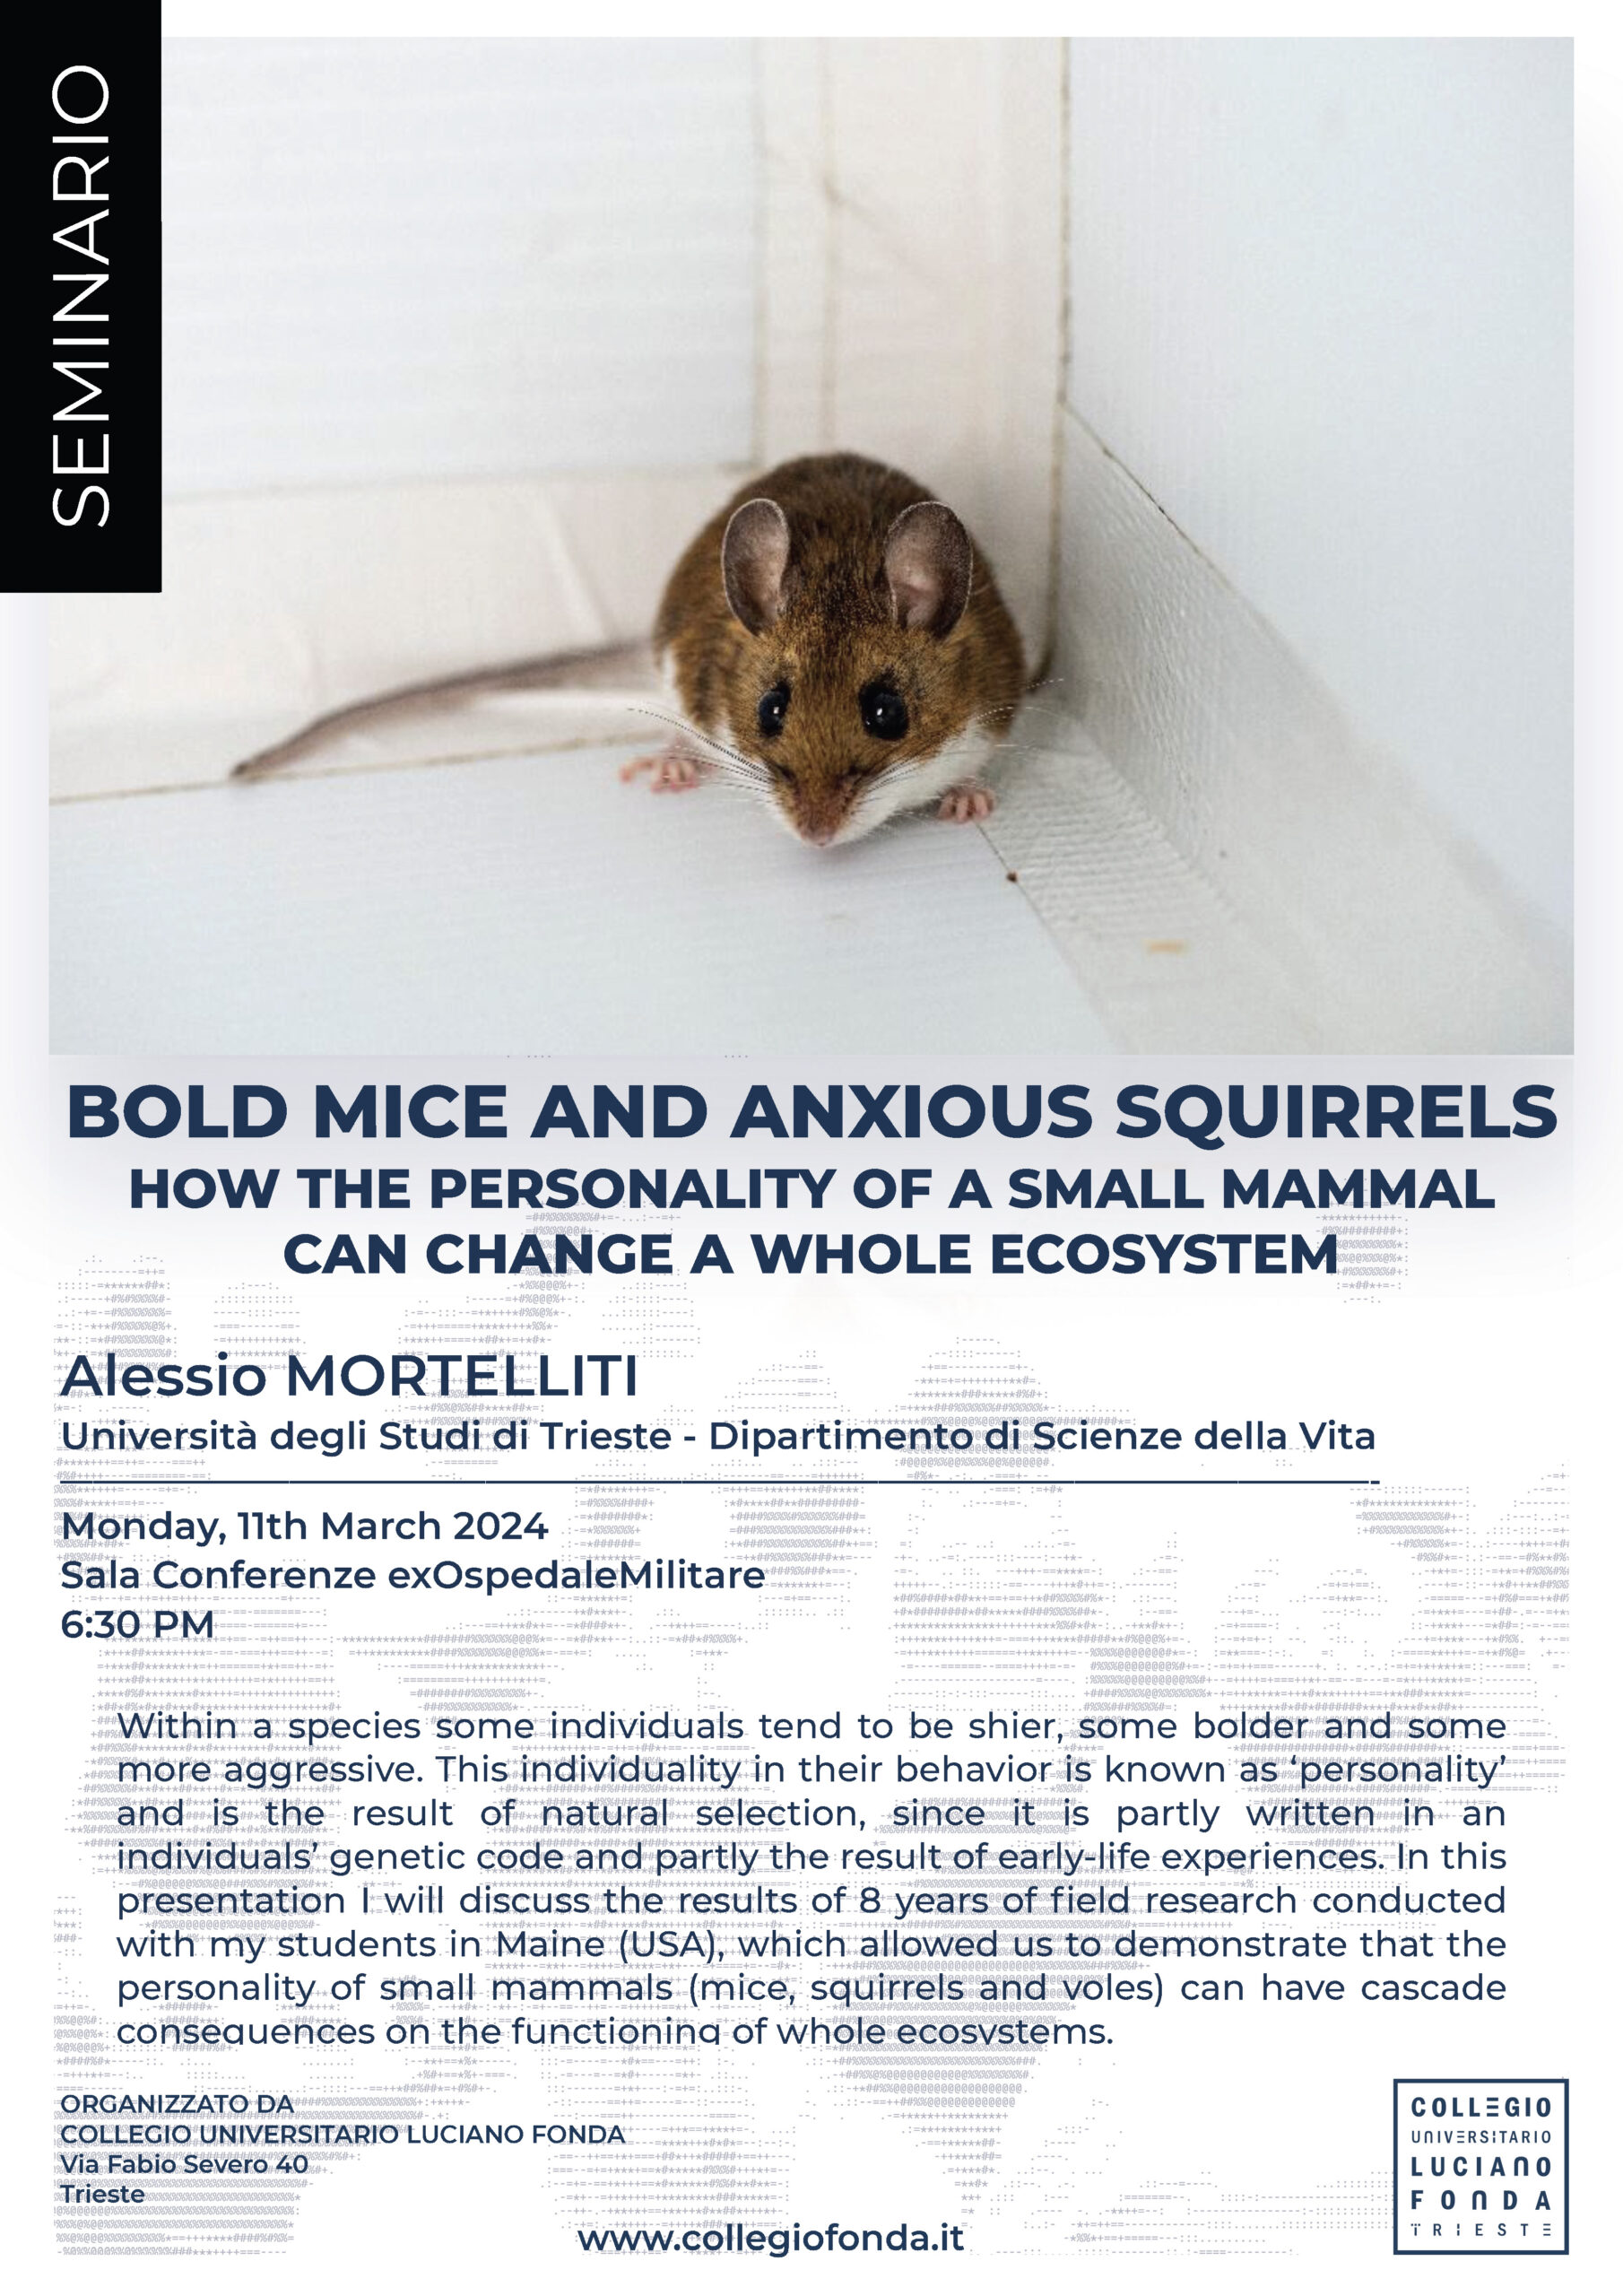 BOLD MICE AND ANXIOUS SQUIRRELS • Seminar by Alessio Mortelliti – Monday, 11th March 2024